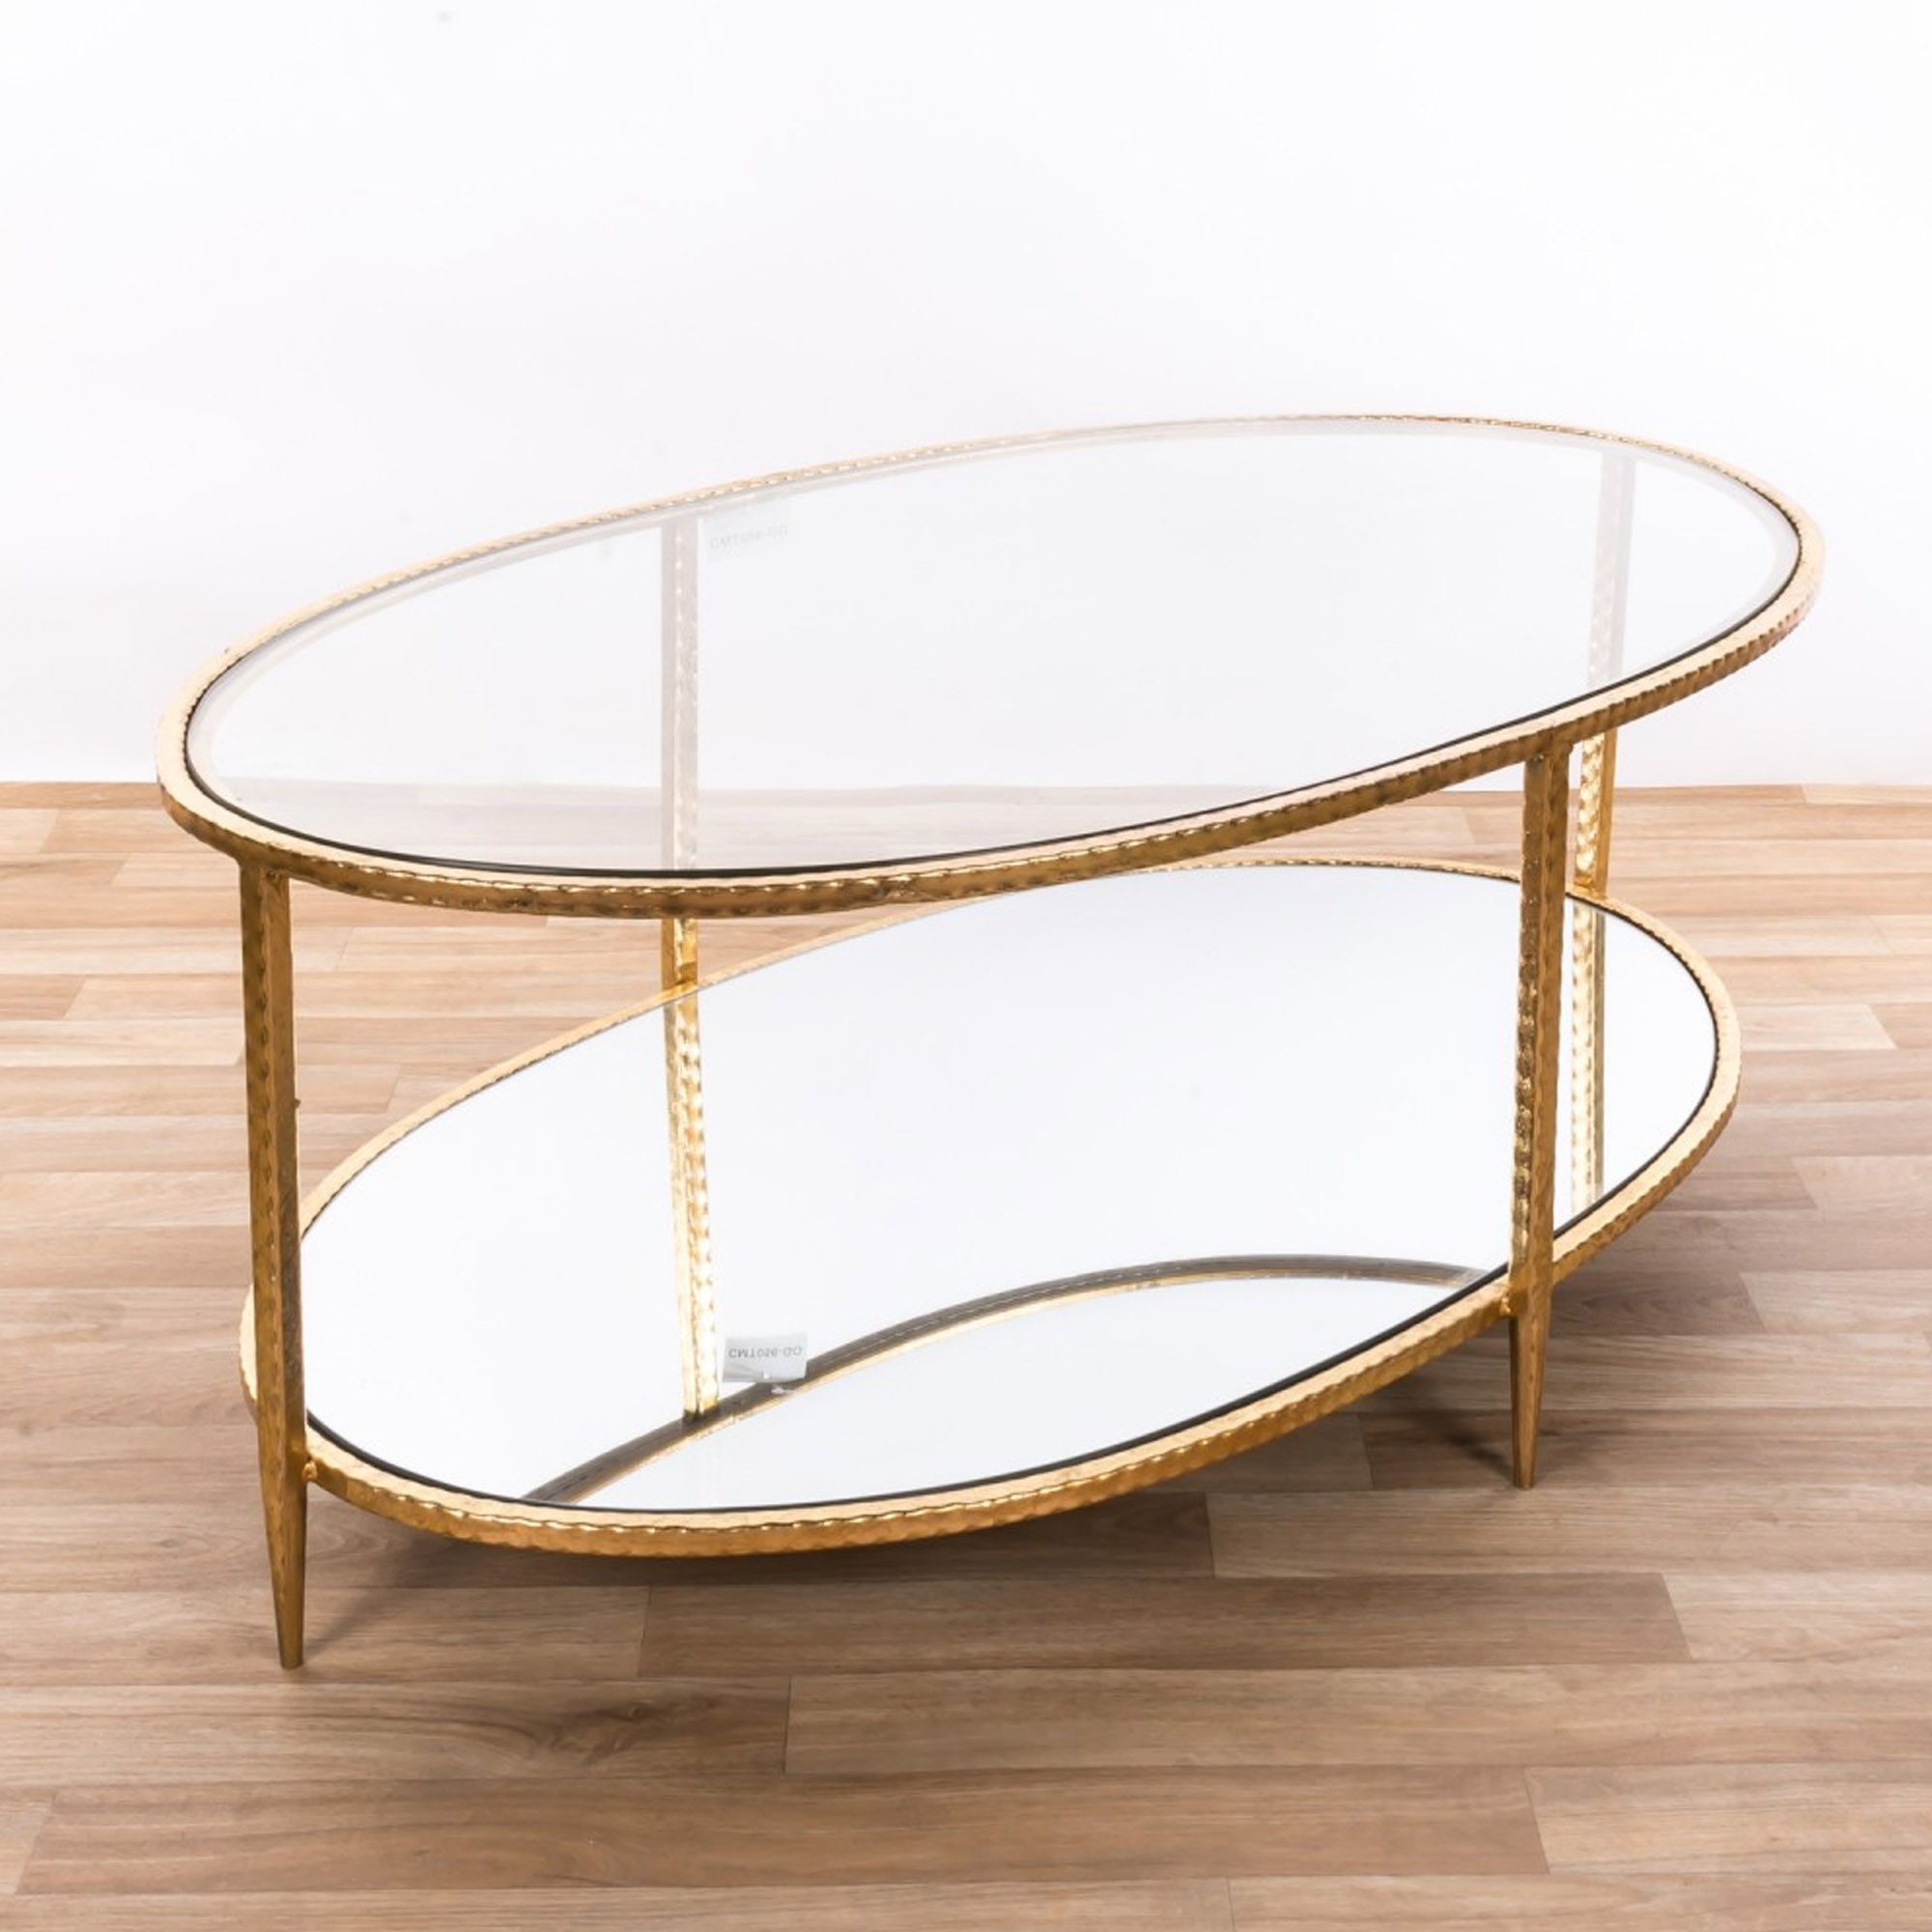 Gin Shu Gold Mirrored Coffee Table | Coffee Tables With Geometric Glass Top Gold Coffee Tables (View 2 of 15)